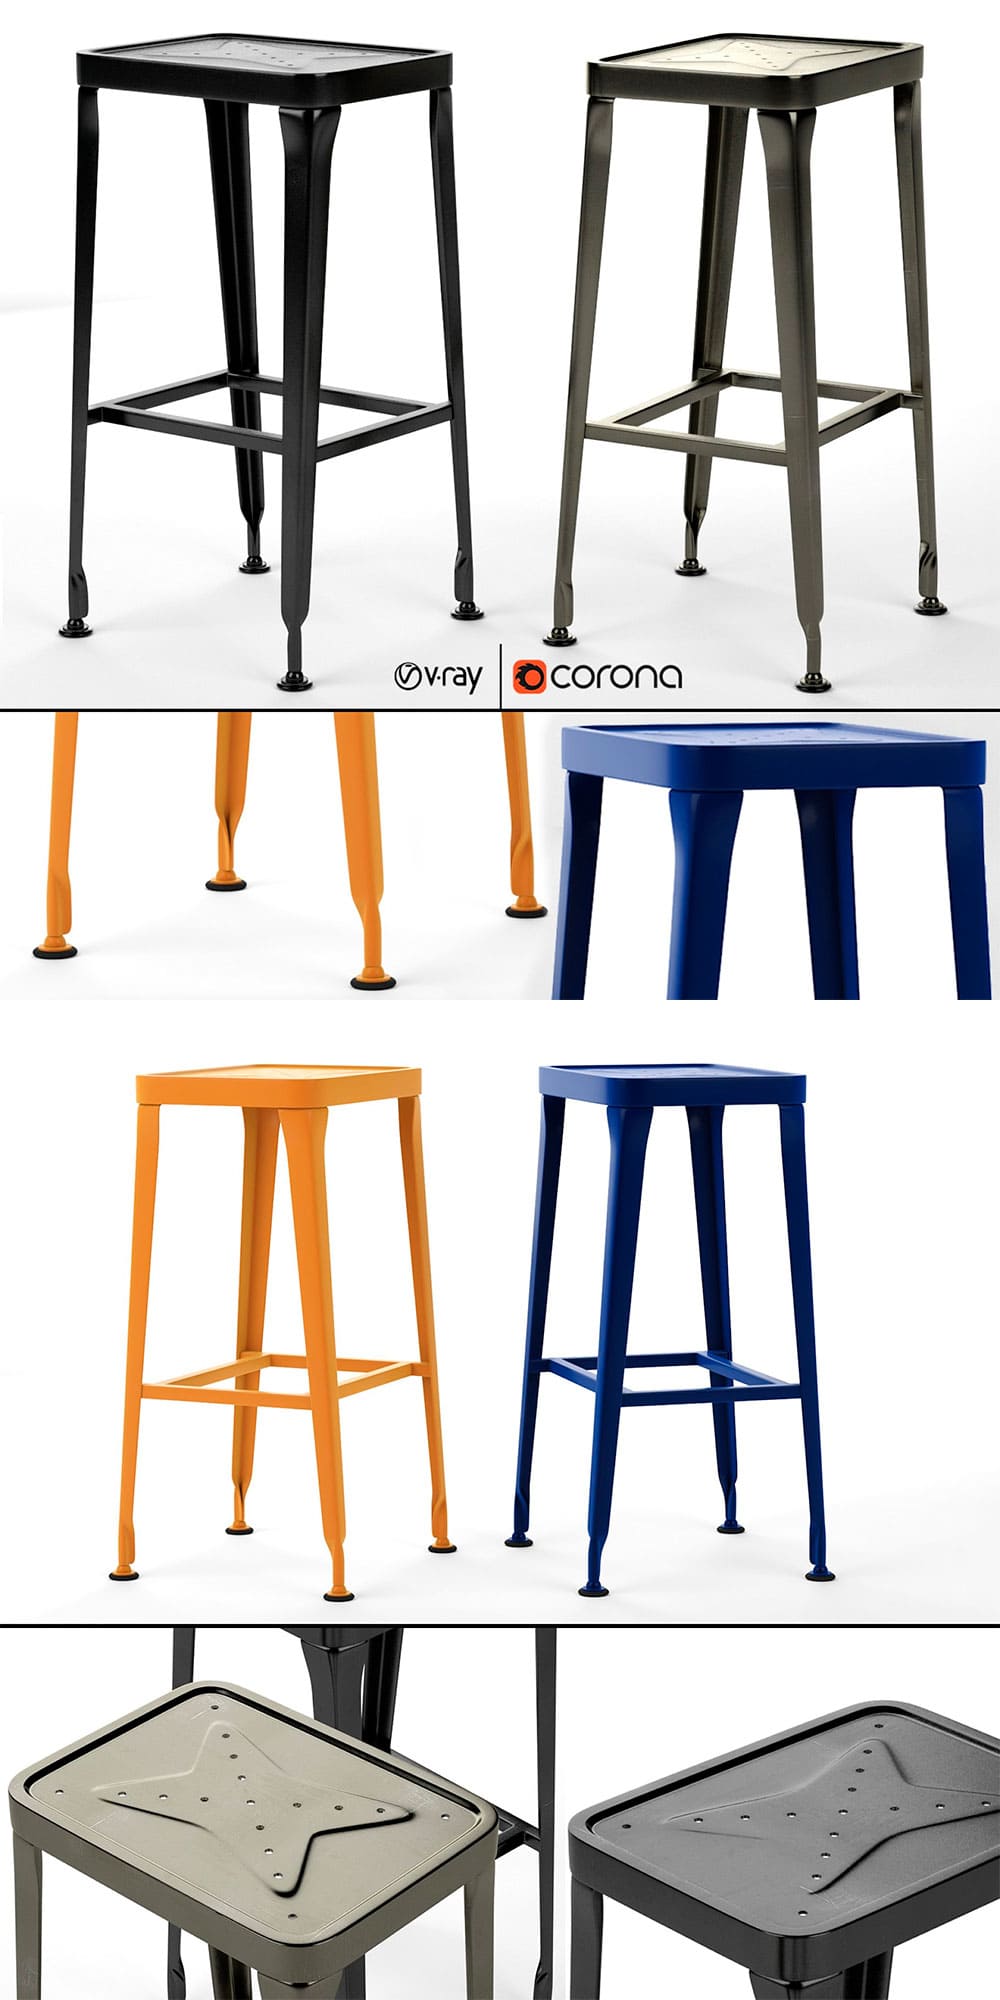 Carbon bar stool industry west, picture for pinterest.